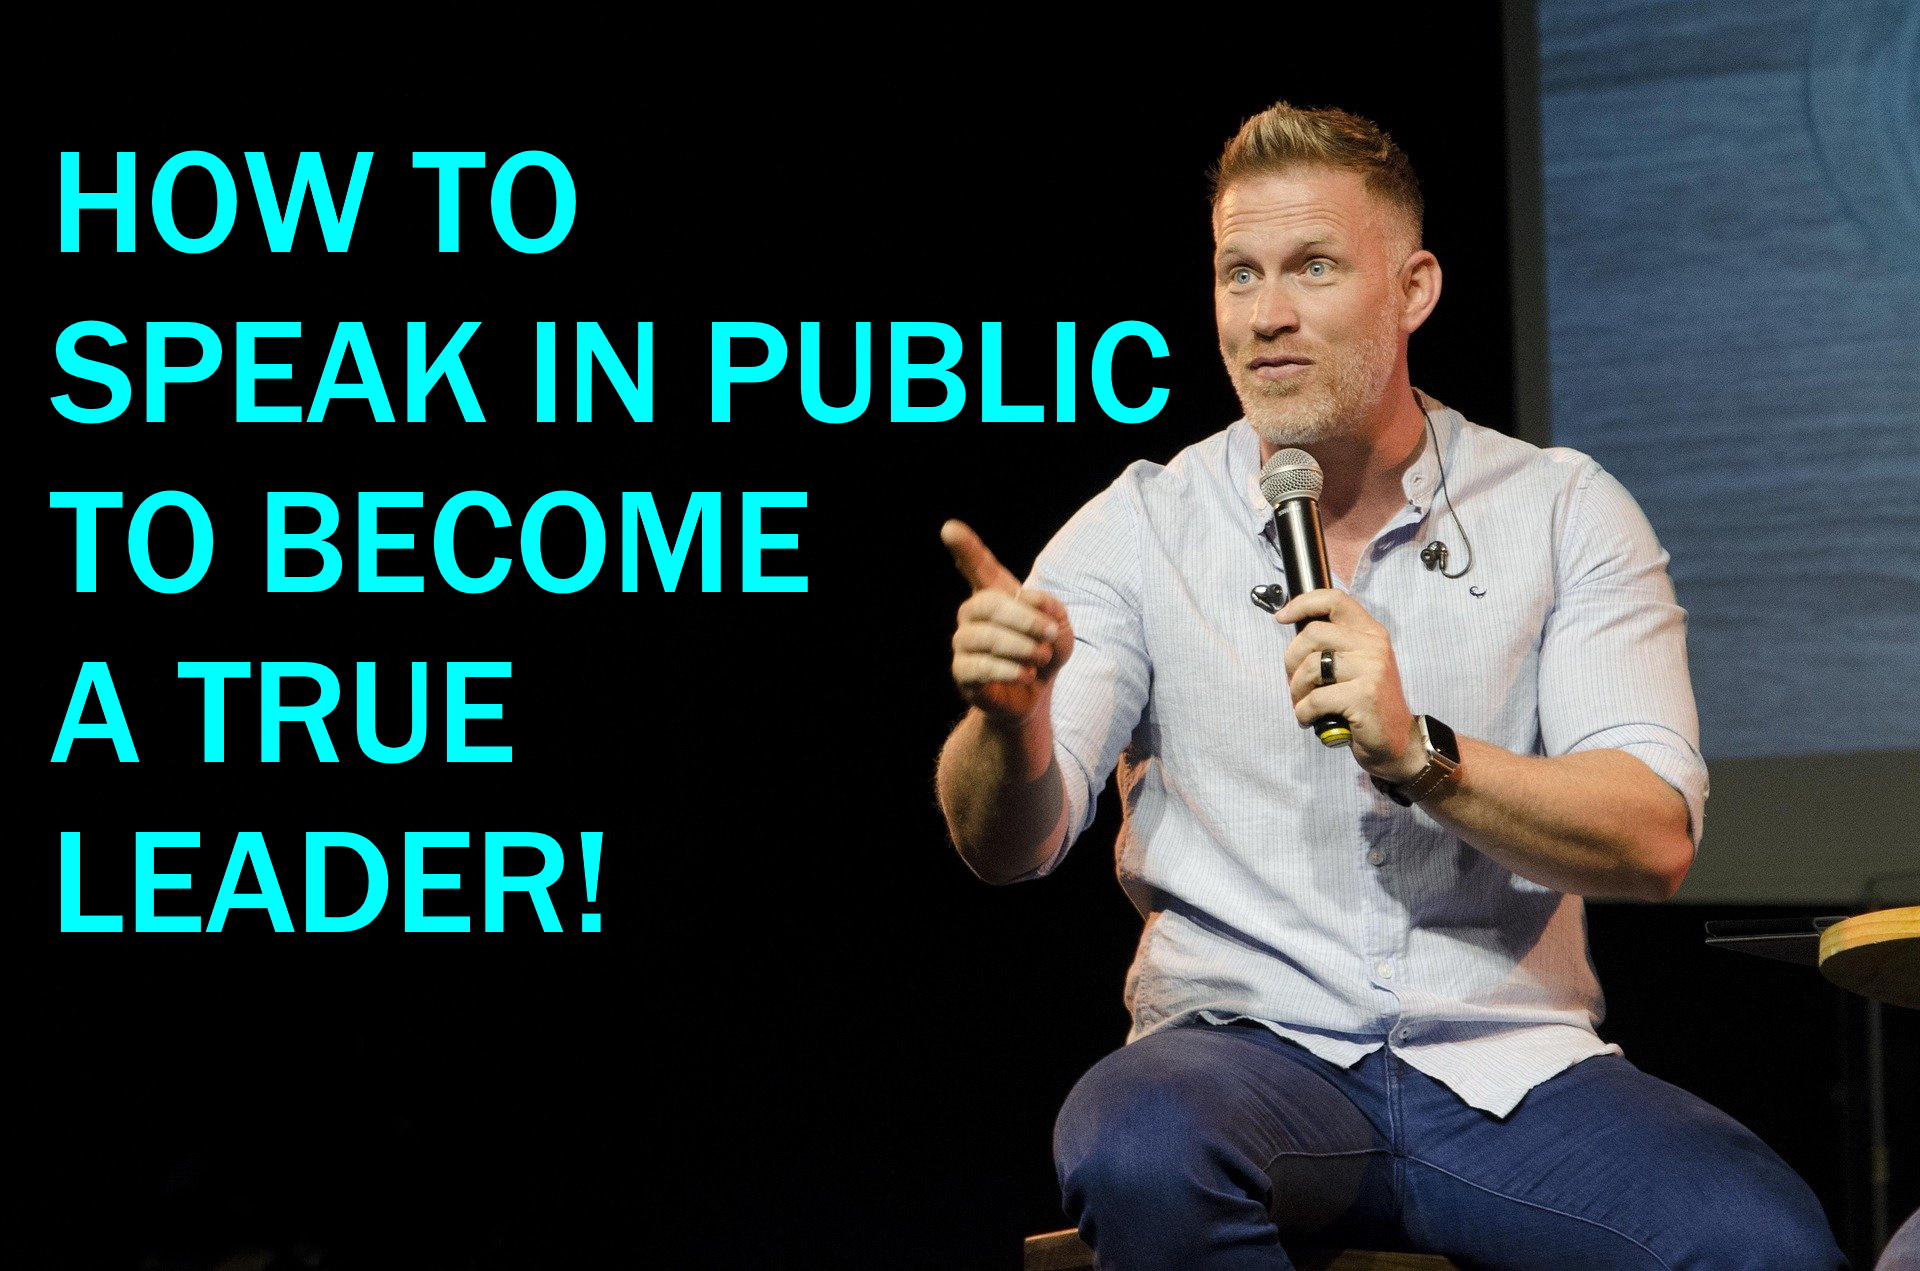 HOW TO SPEAK in public to Become a True Leader